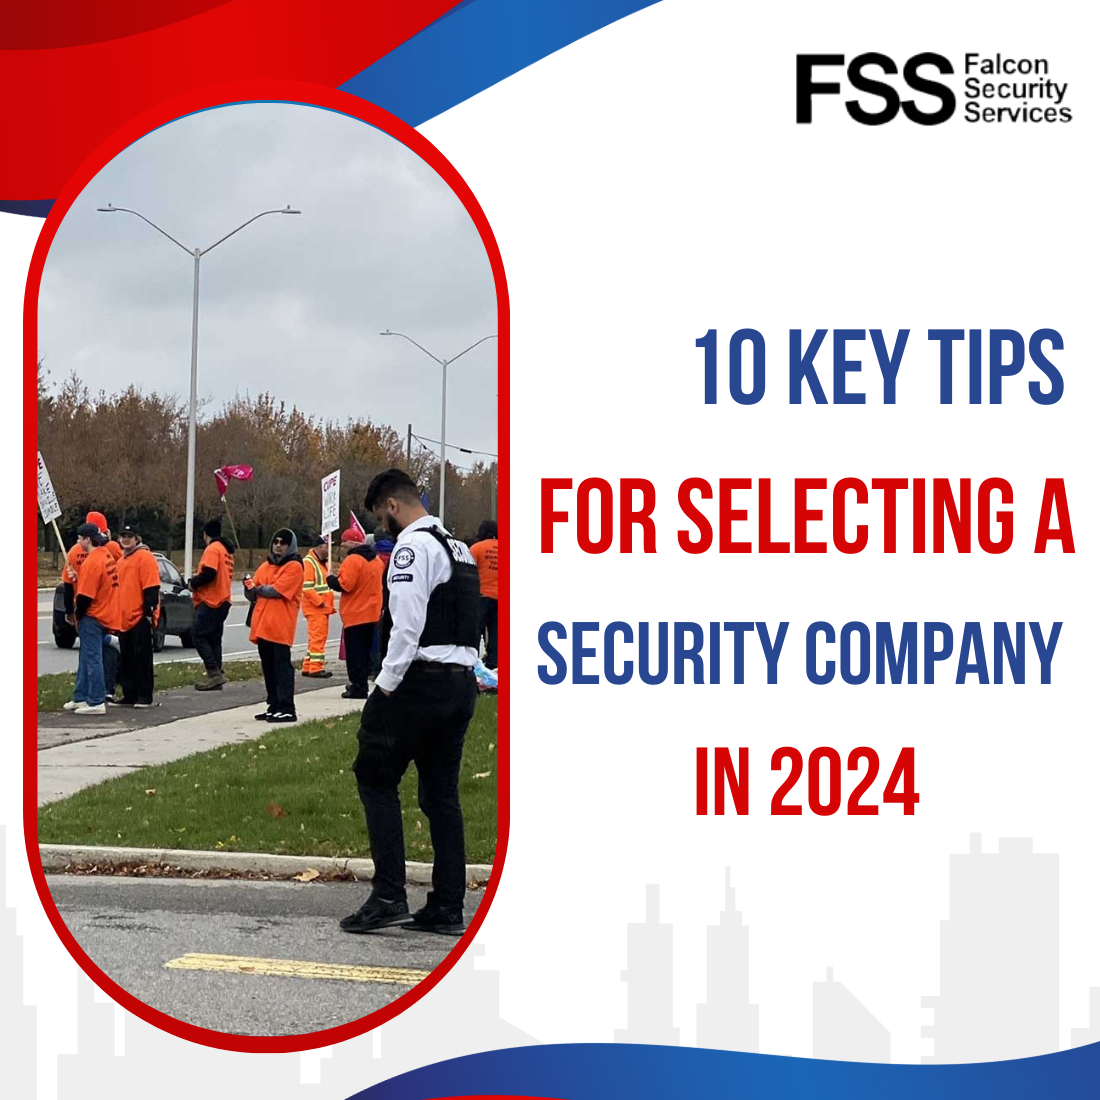 10 Key Tips for Selecting a Security Company in 2024